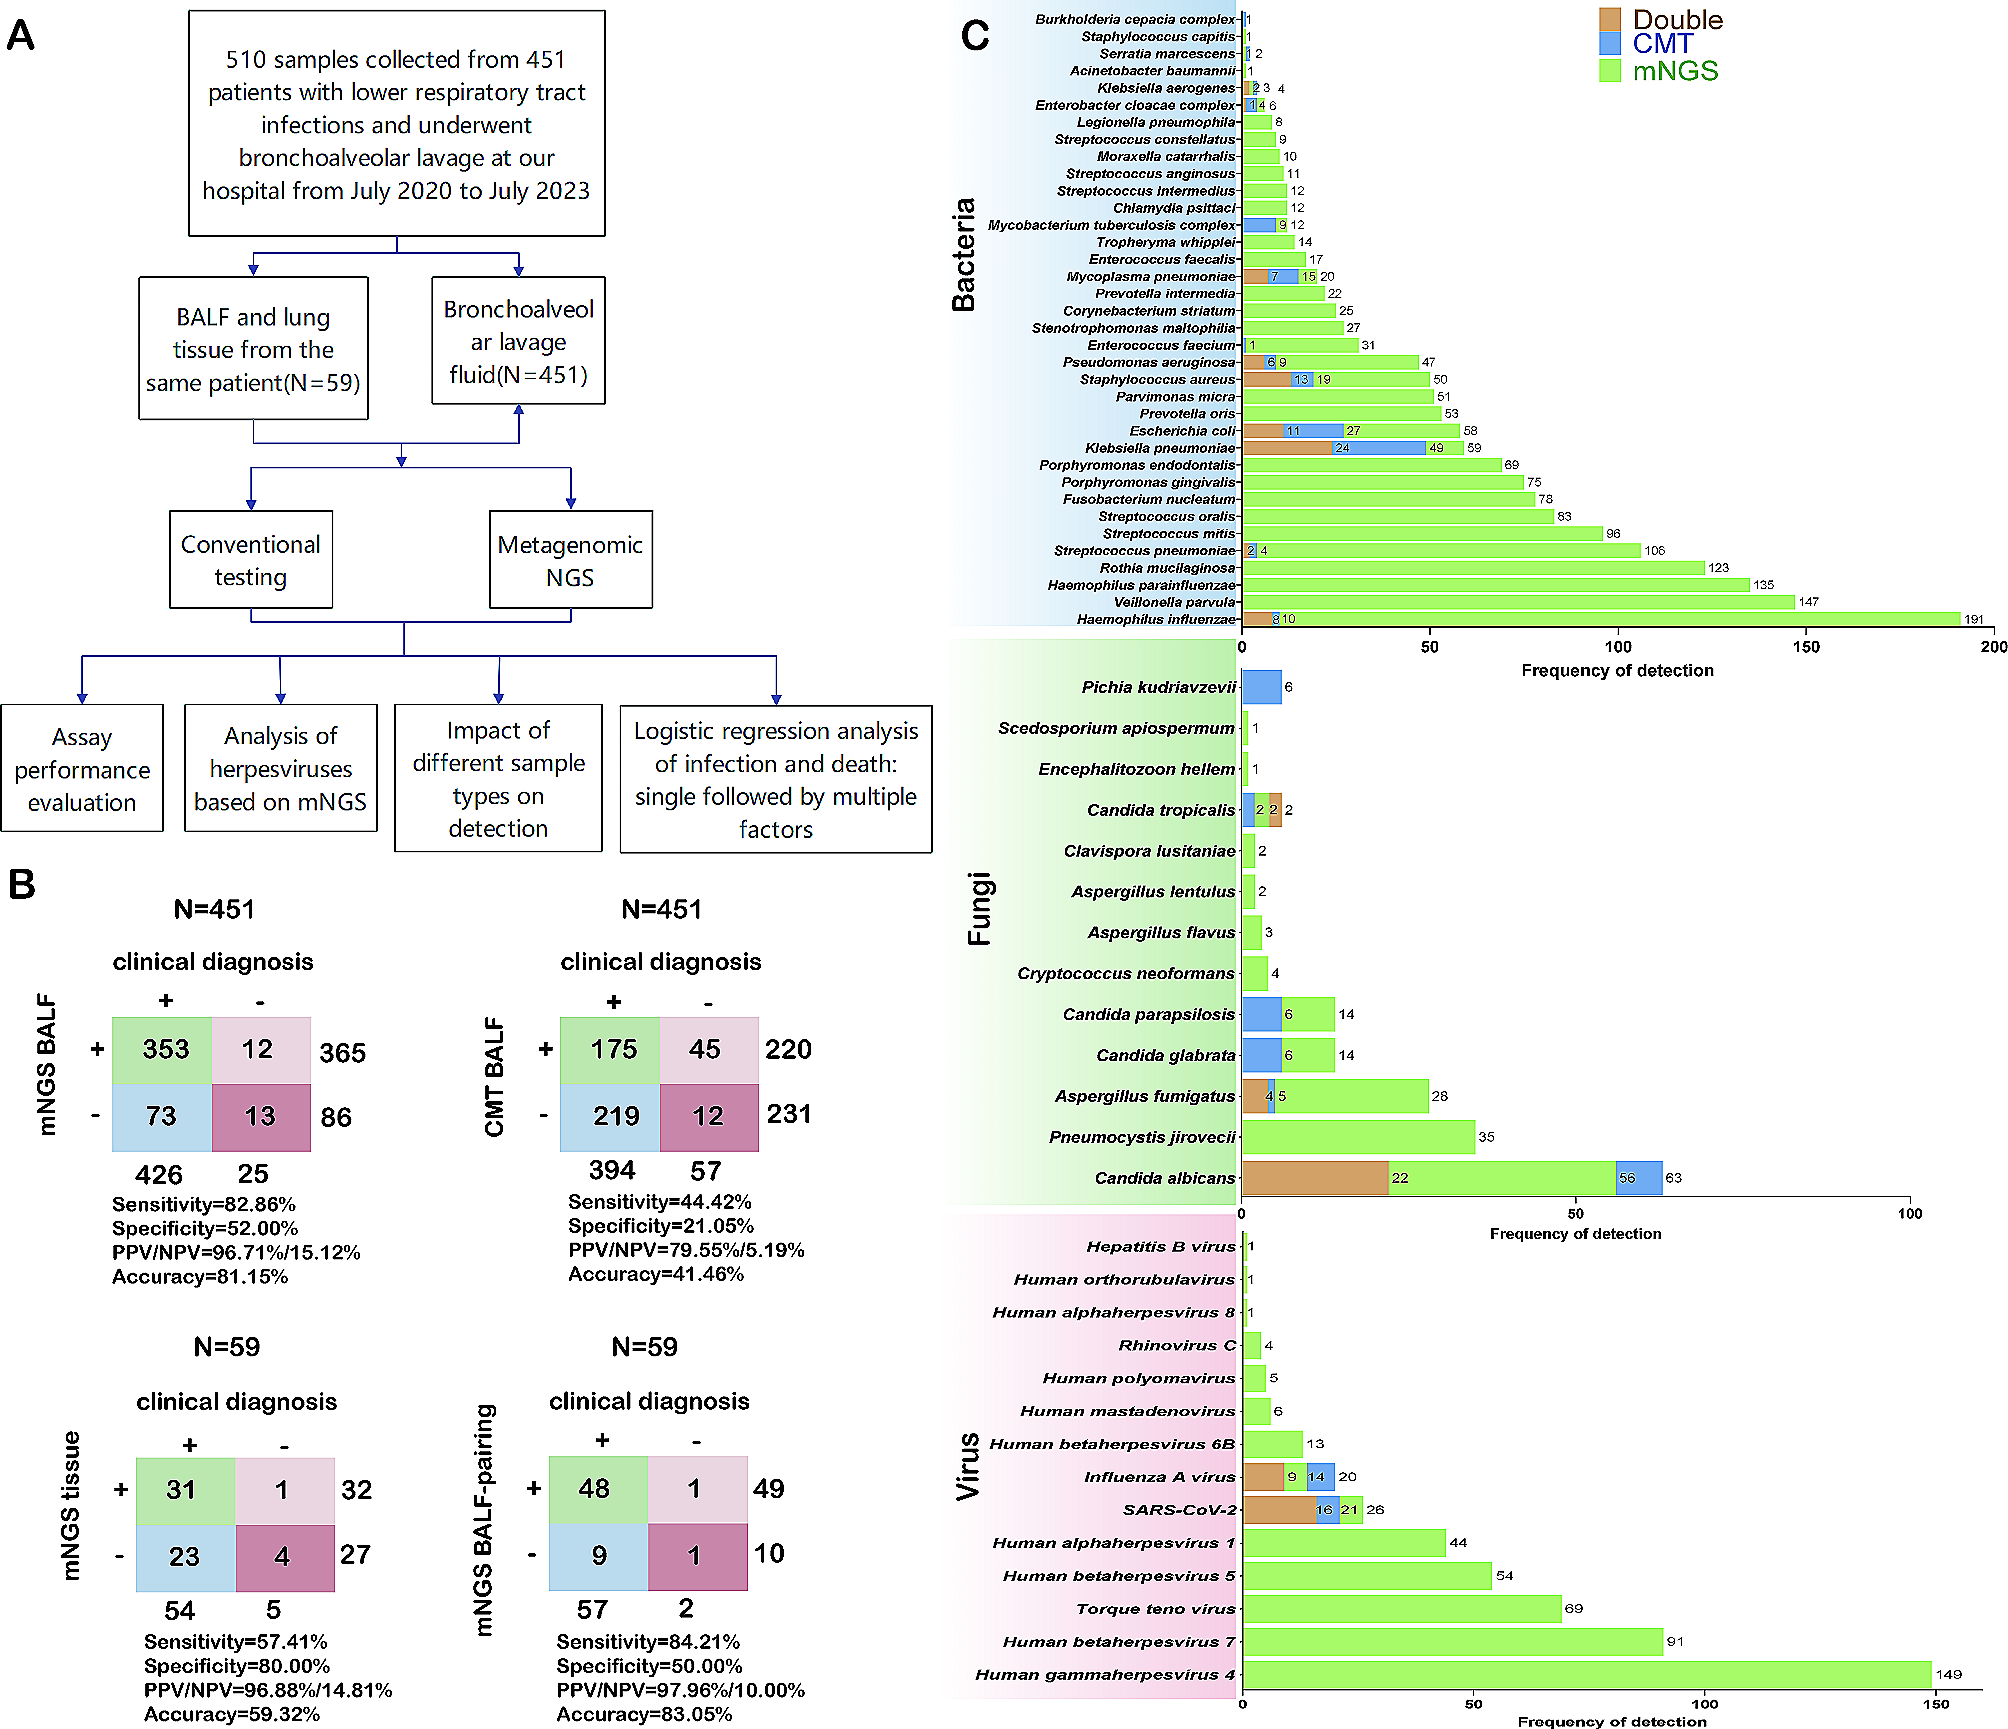 A single-center, retrospective study of hospitalized patients with lower respiratory tract infections: clinical assessment of metagenomic next-generation sequencing and identification of risk factors in patients